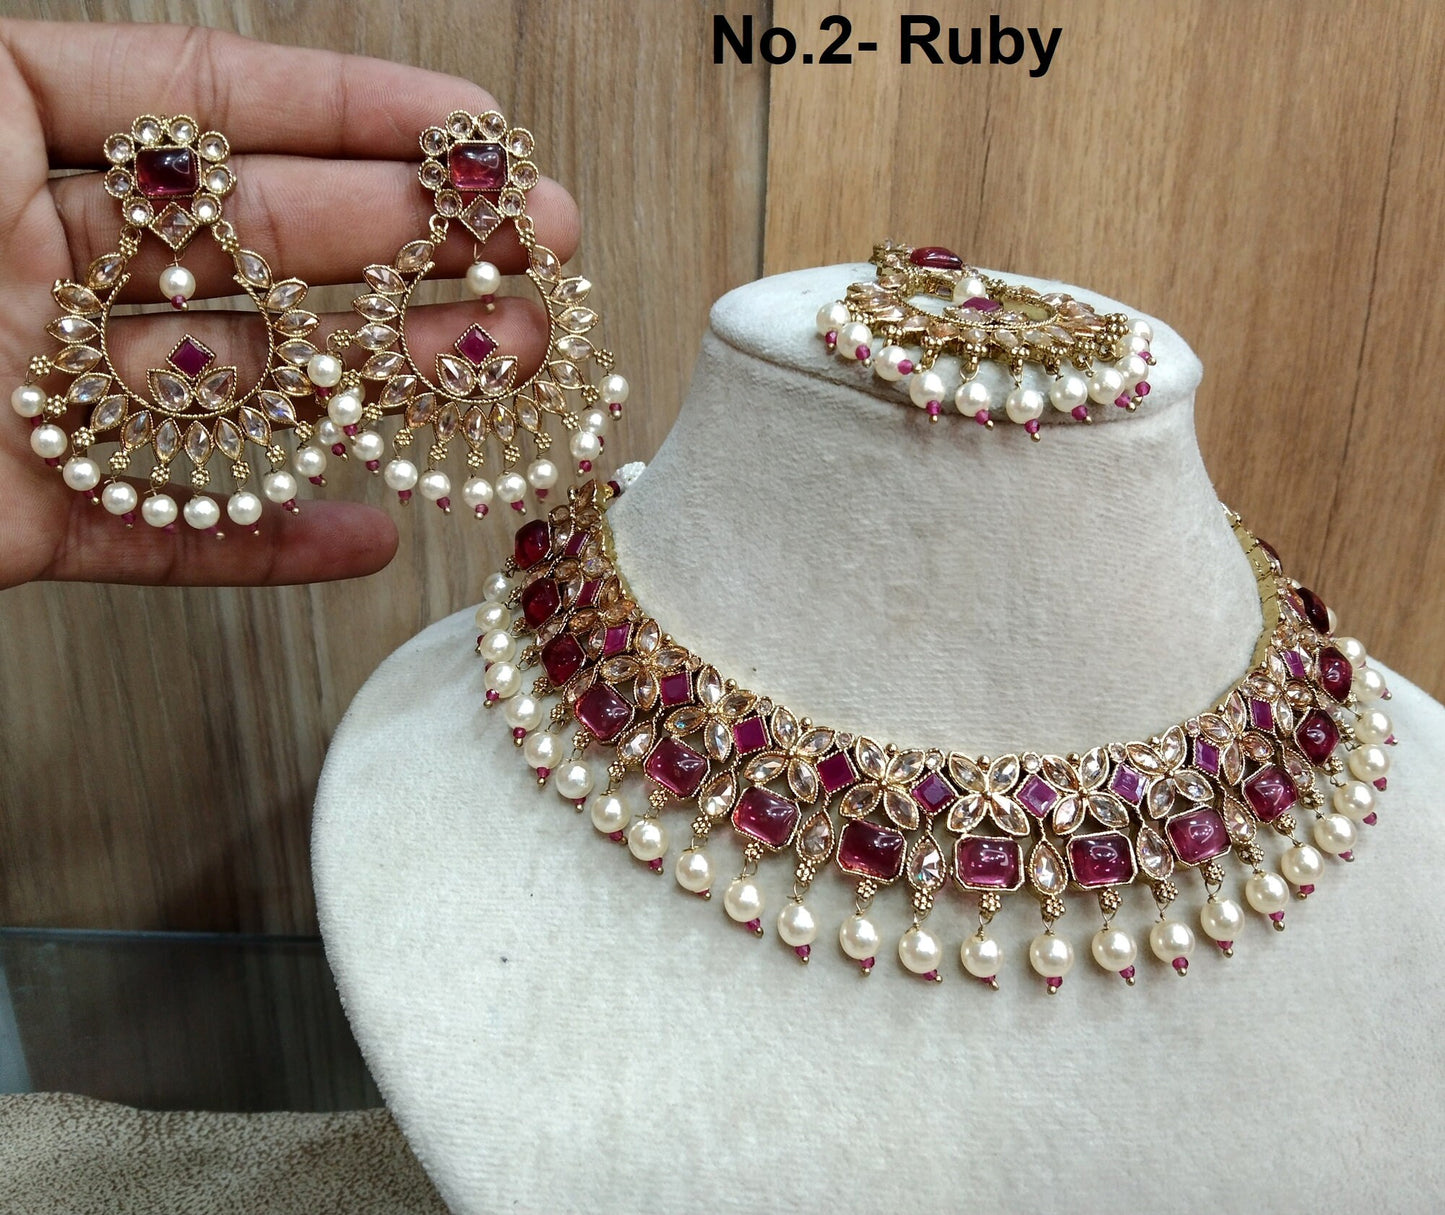 Indian Jewellery/Dark gold mint pink, Ruby necklace Set/Bollywood Gold Indian Jewelry Jewellery Set cairns /Bridesmaid jewellery sets